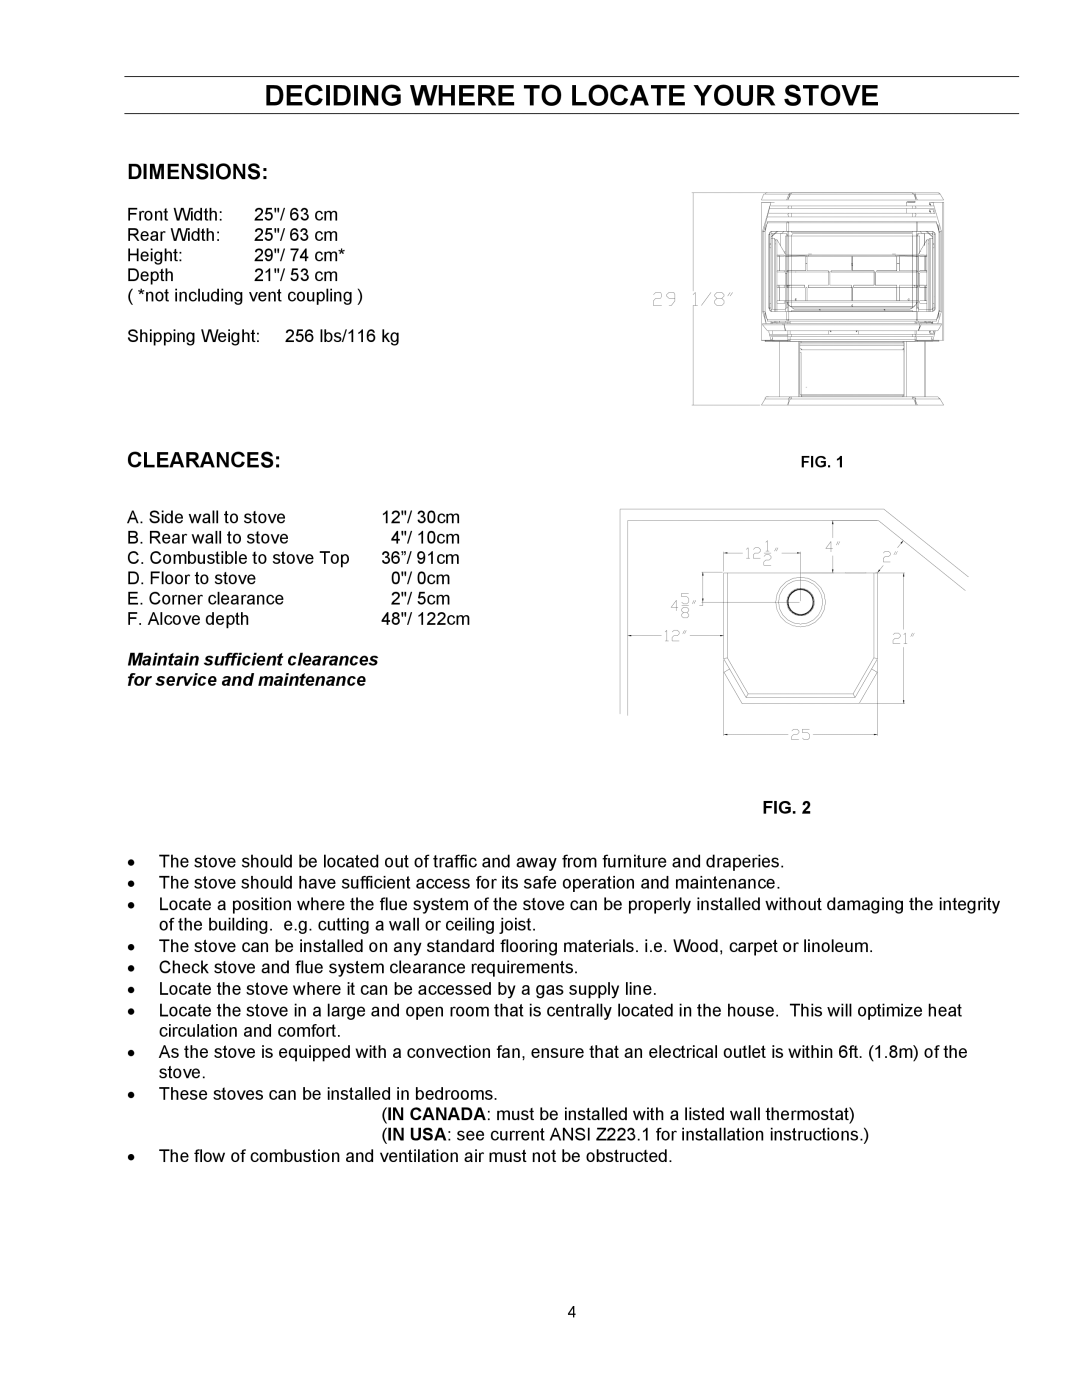 Enviro EG 40 B owner manual Deciding Where to Locate Your Stove, Dimensions, Clearances 